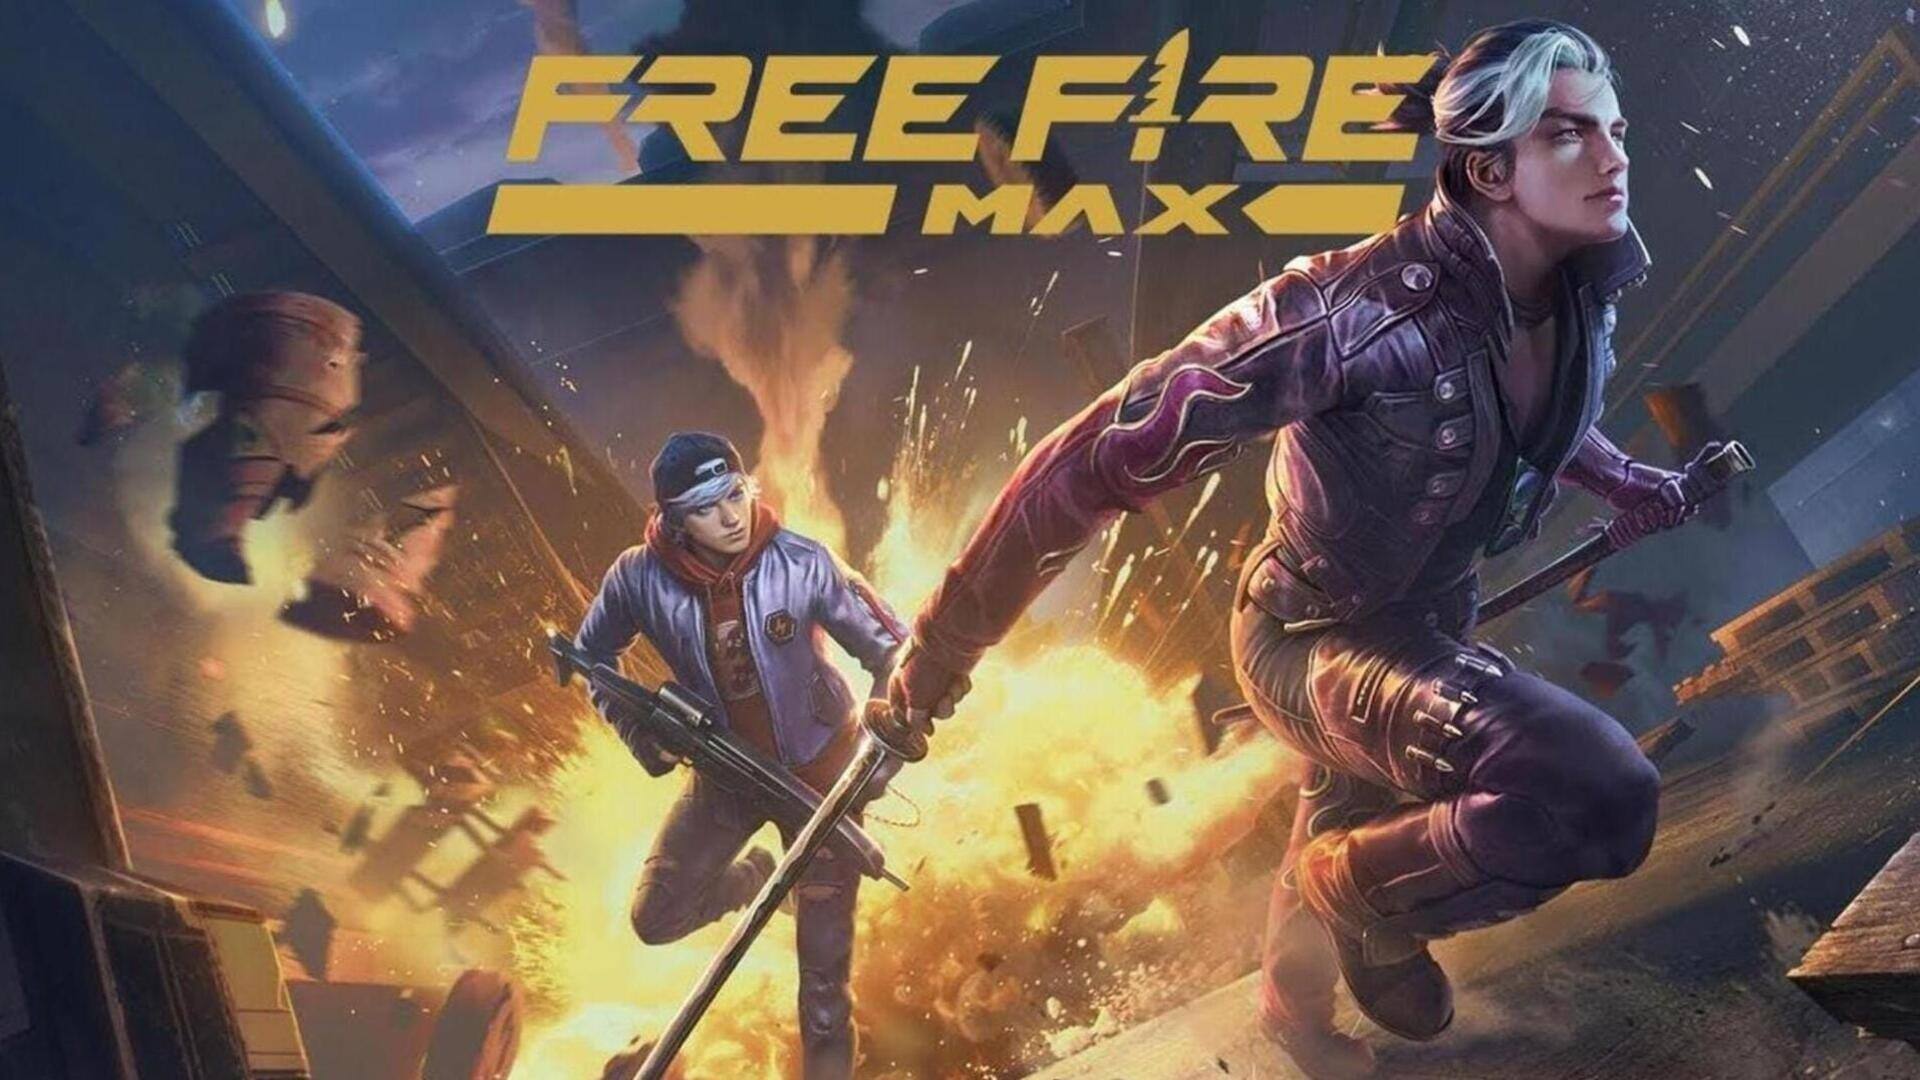 Garena Free Fire MAX releases redeem codes for November 27